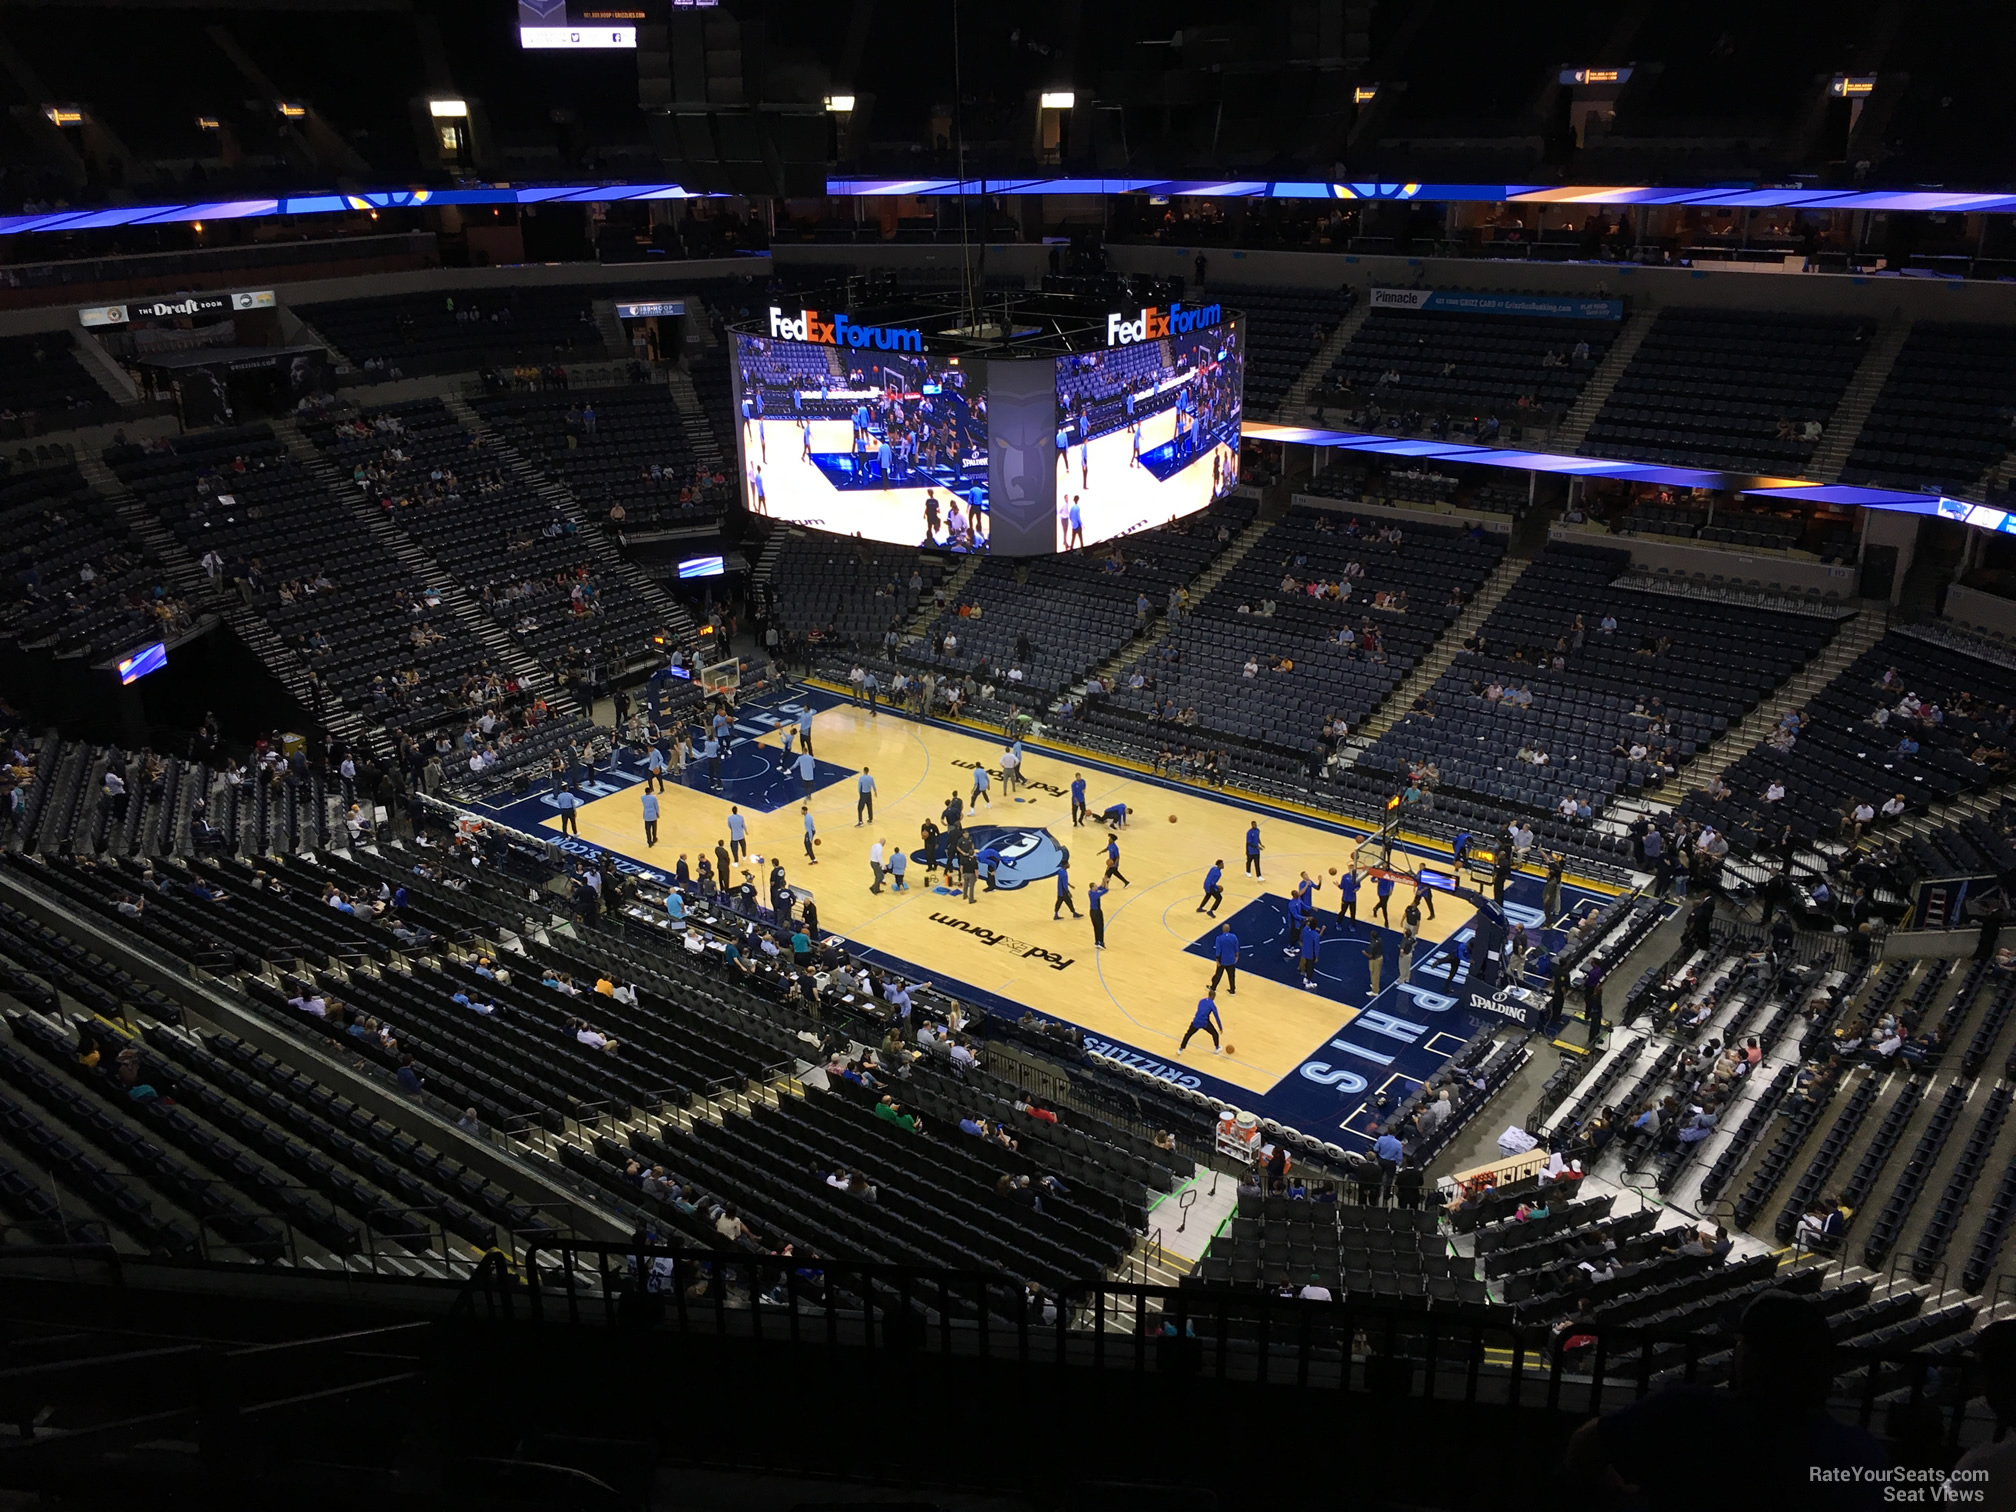 Free Cooling at the FedExForum